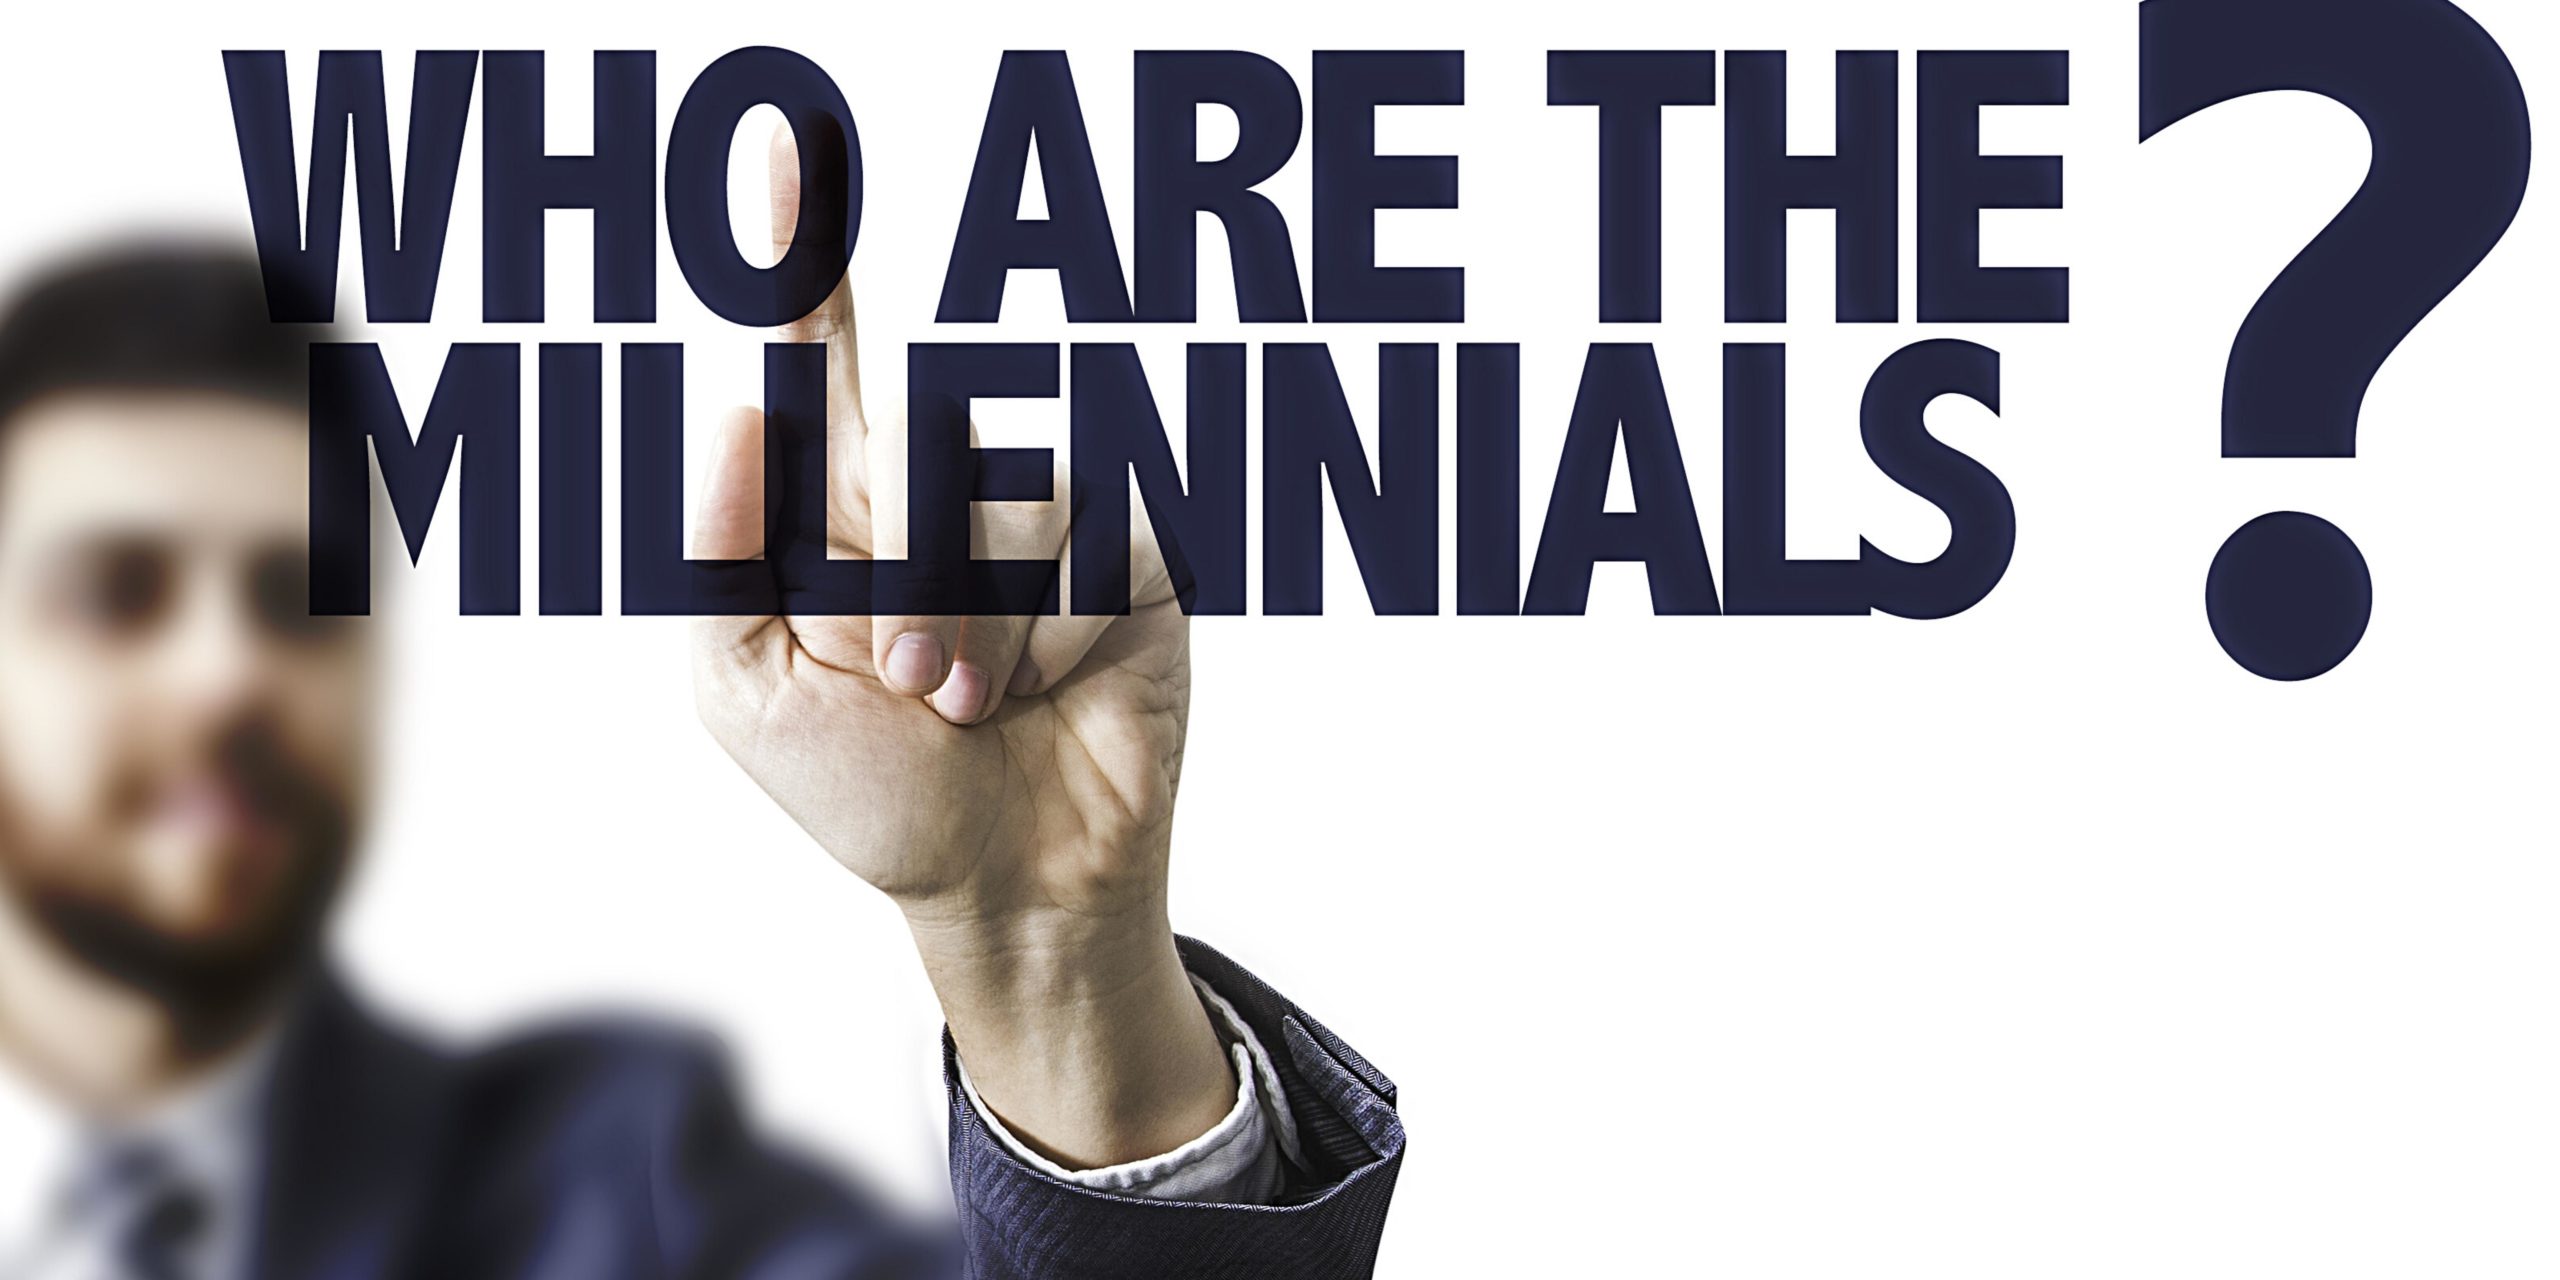 Who are the millennials?